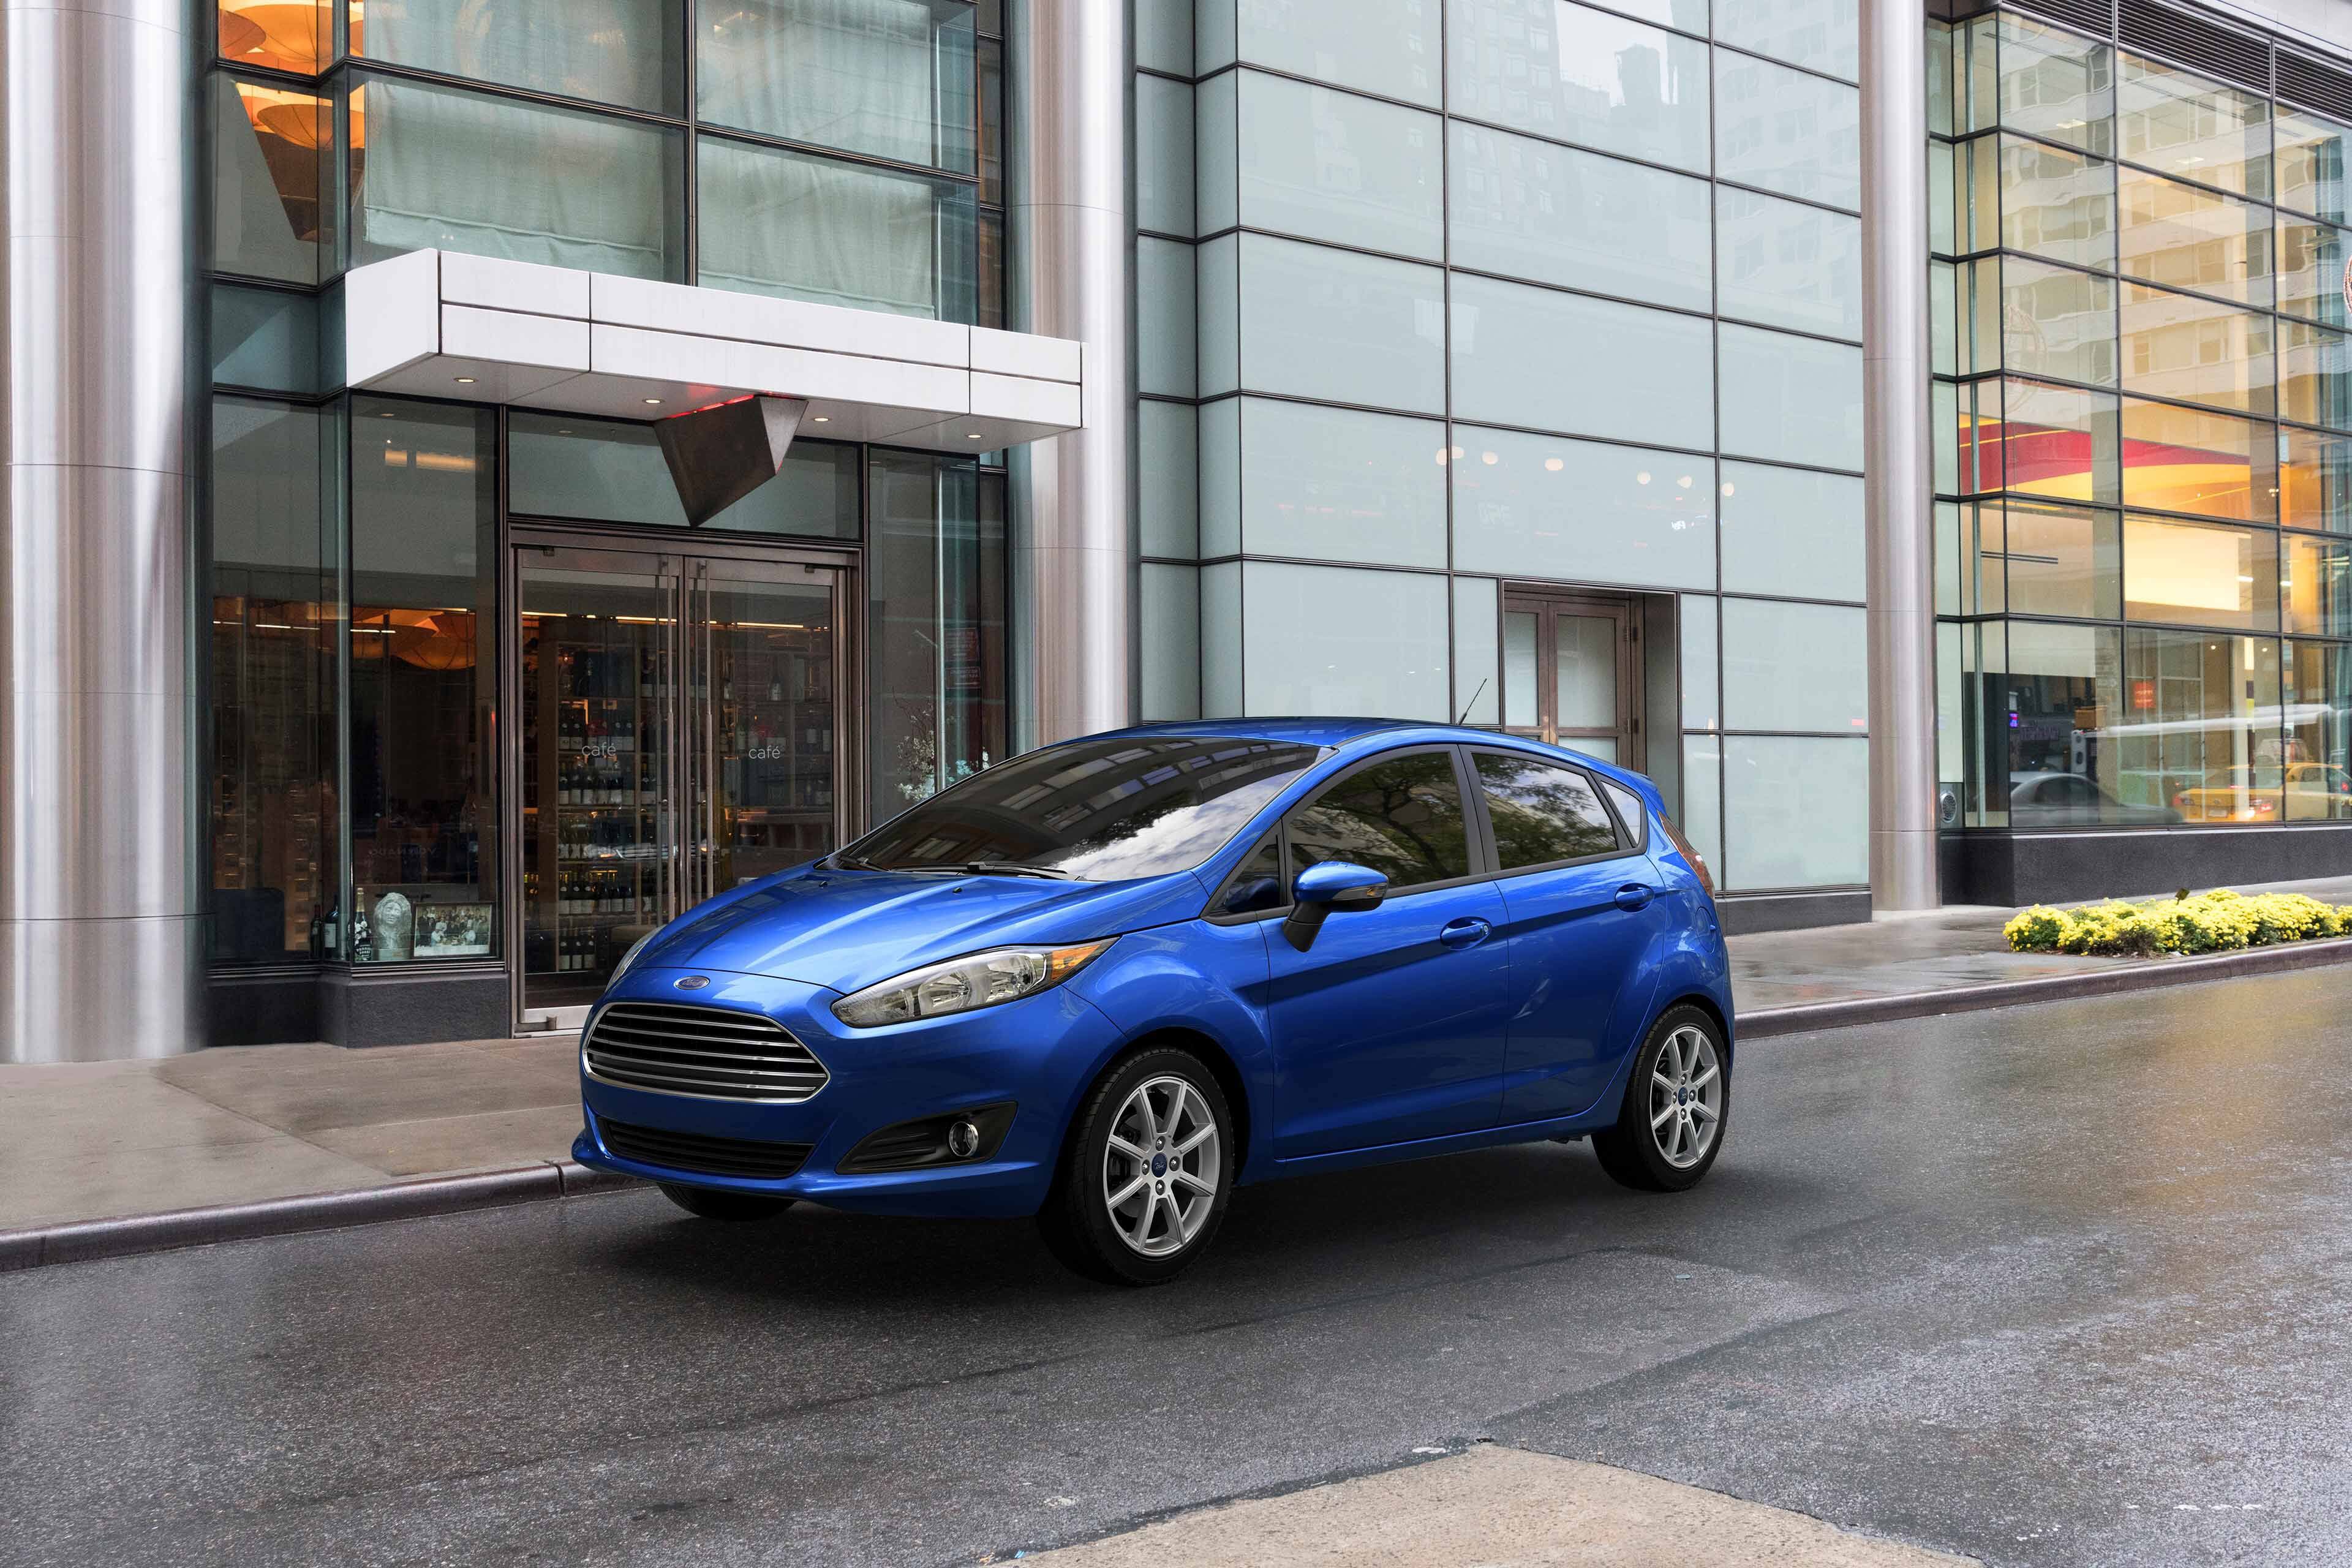 blue 2019 ford fiesta parked in the city